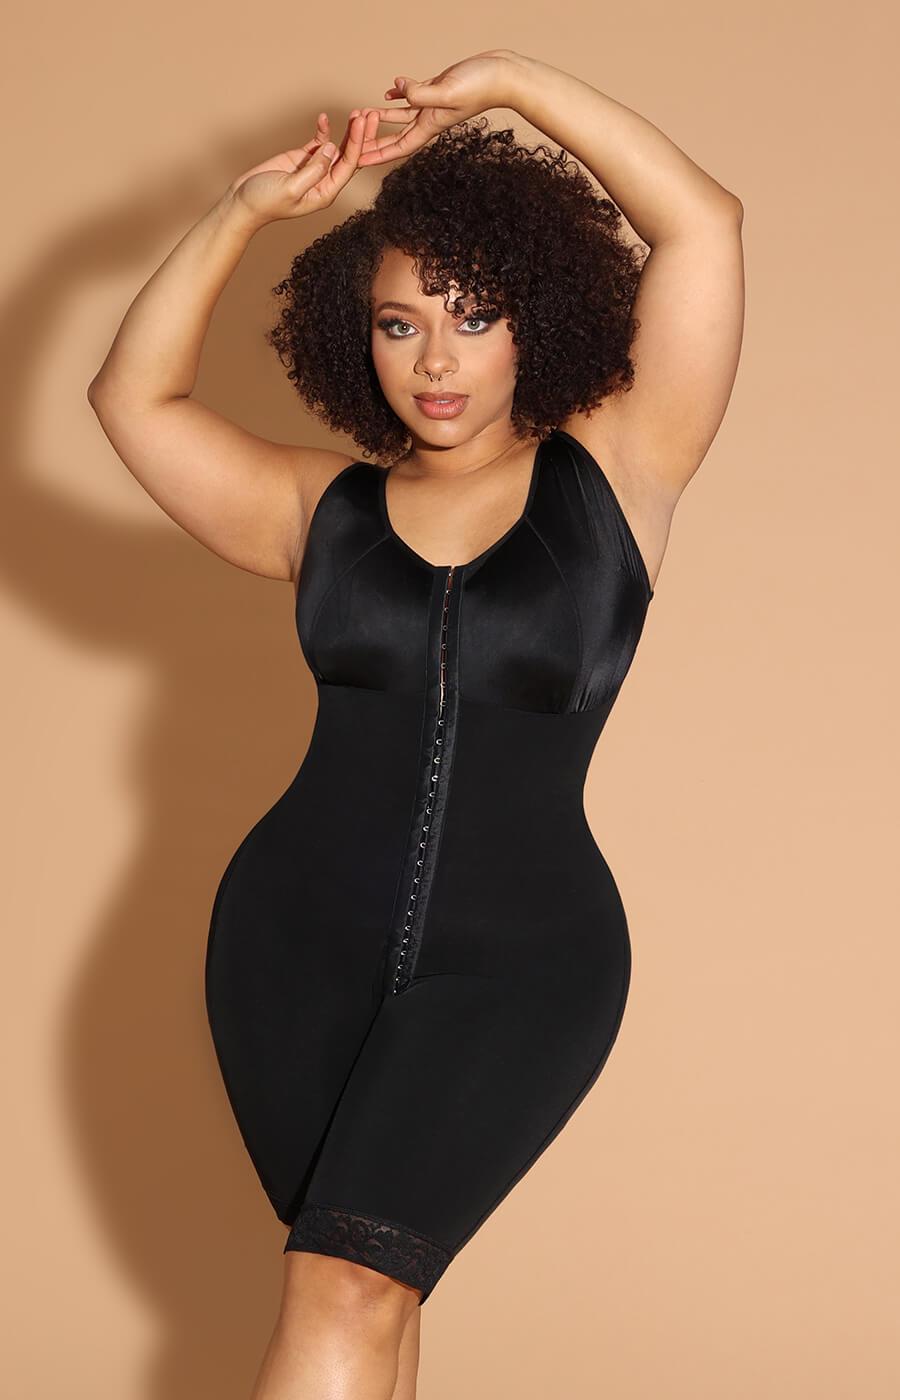 Shopping For Body Shapers